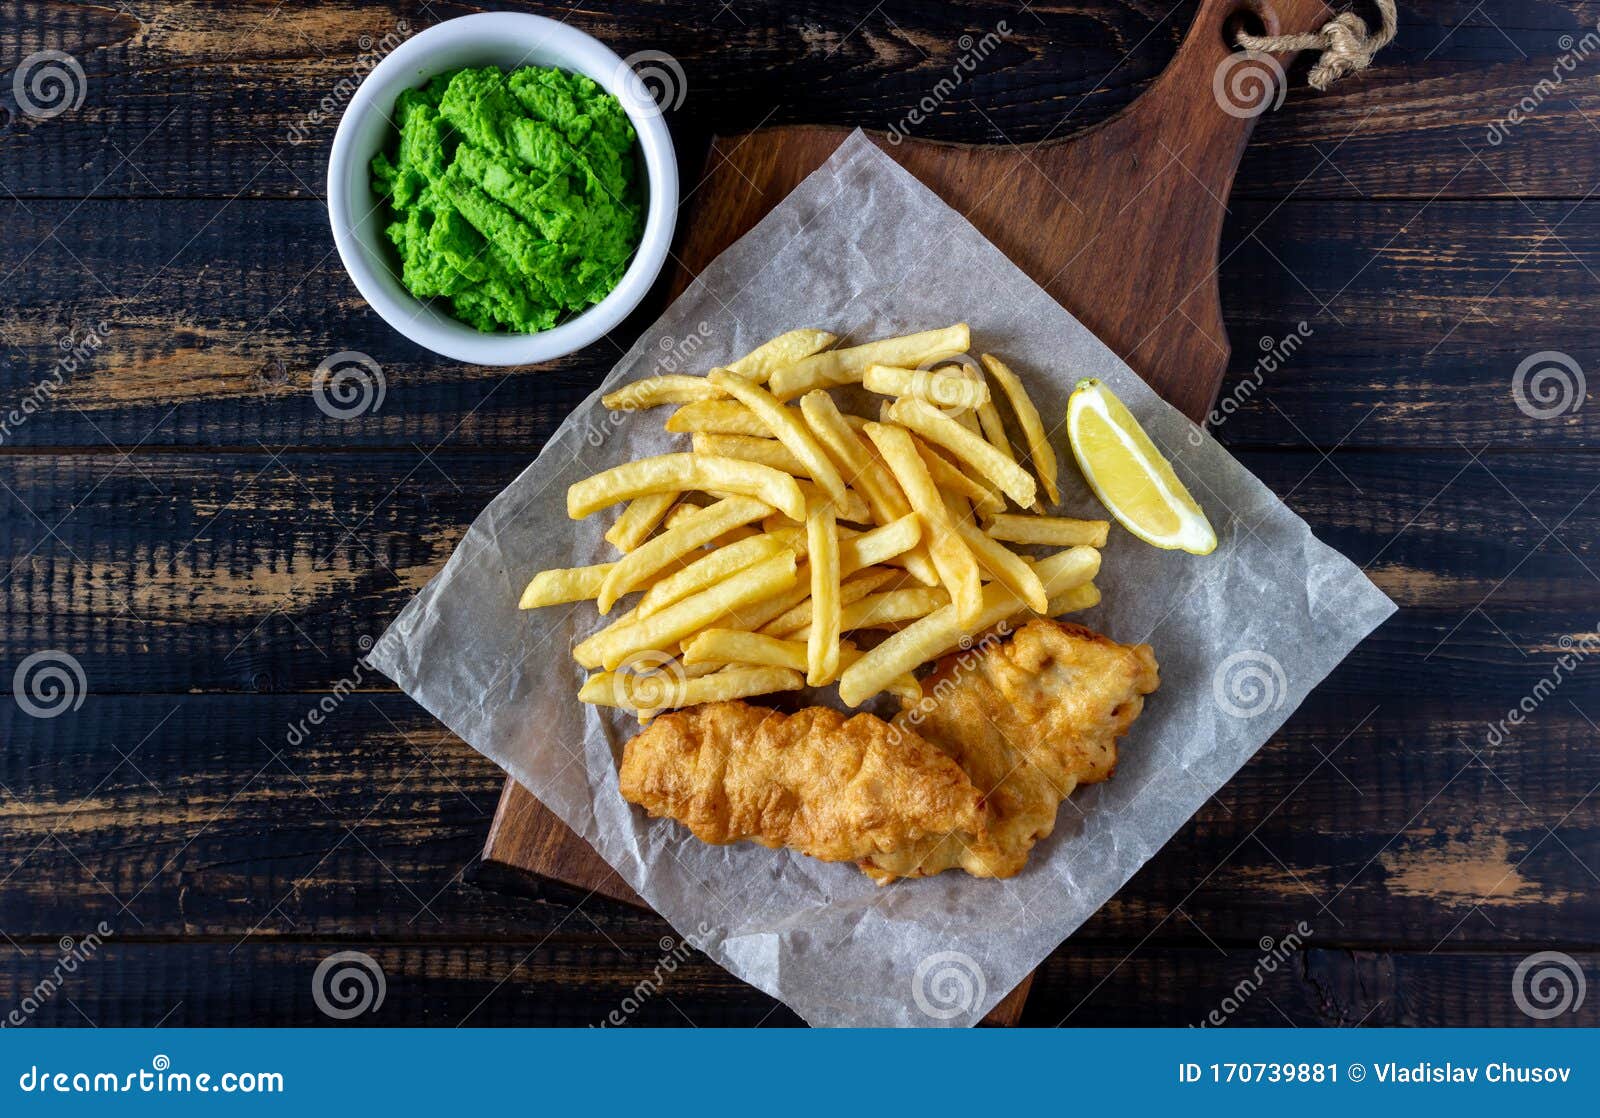 Fish And Chips On A Wooden Background. British Fast Food ...